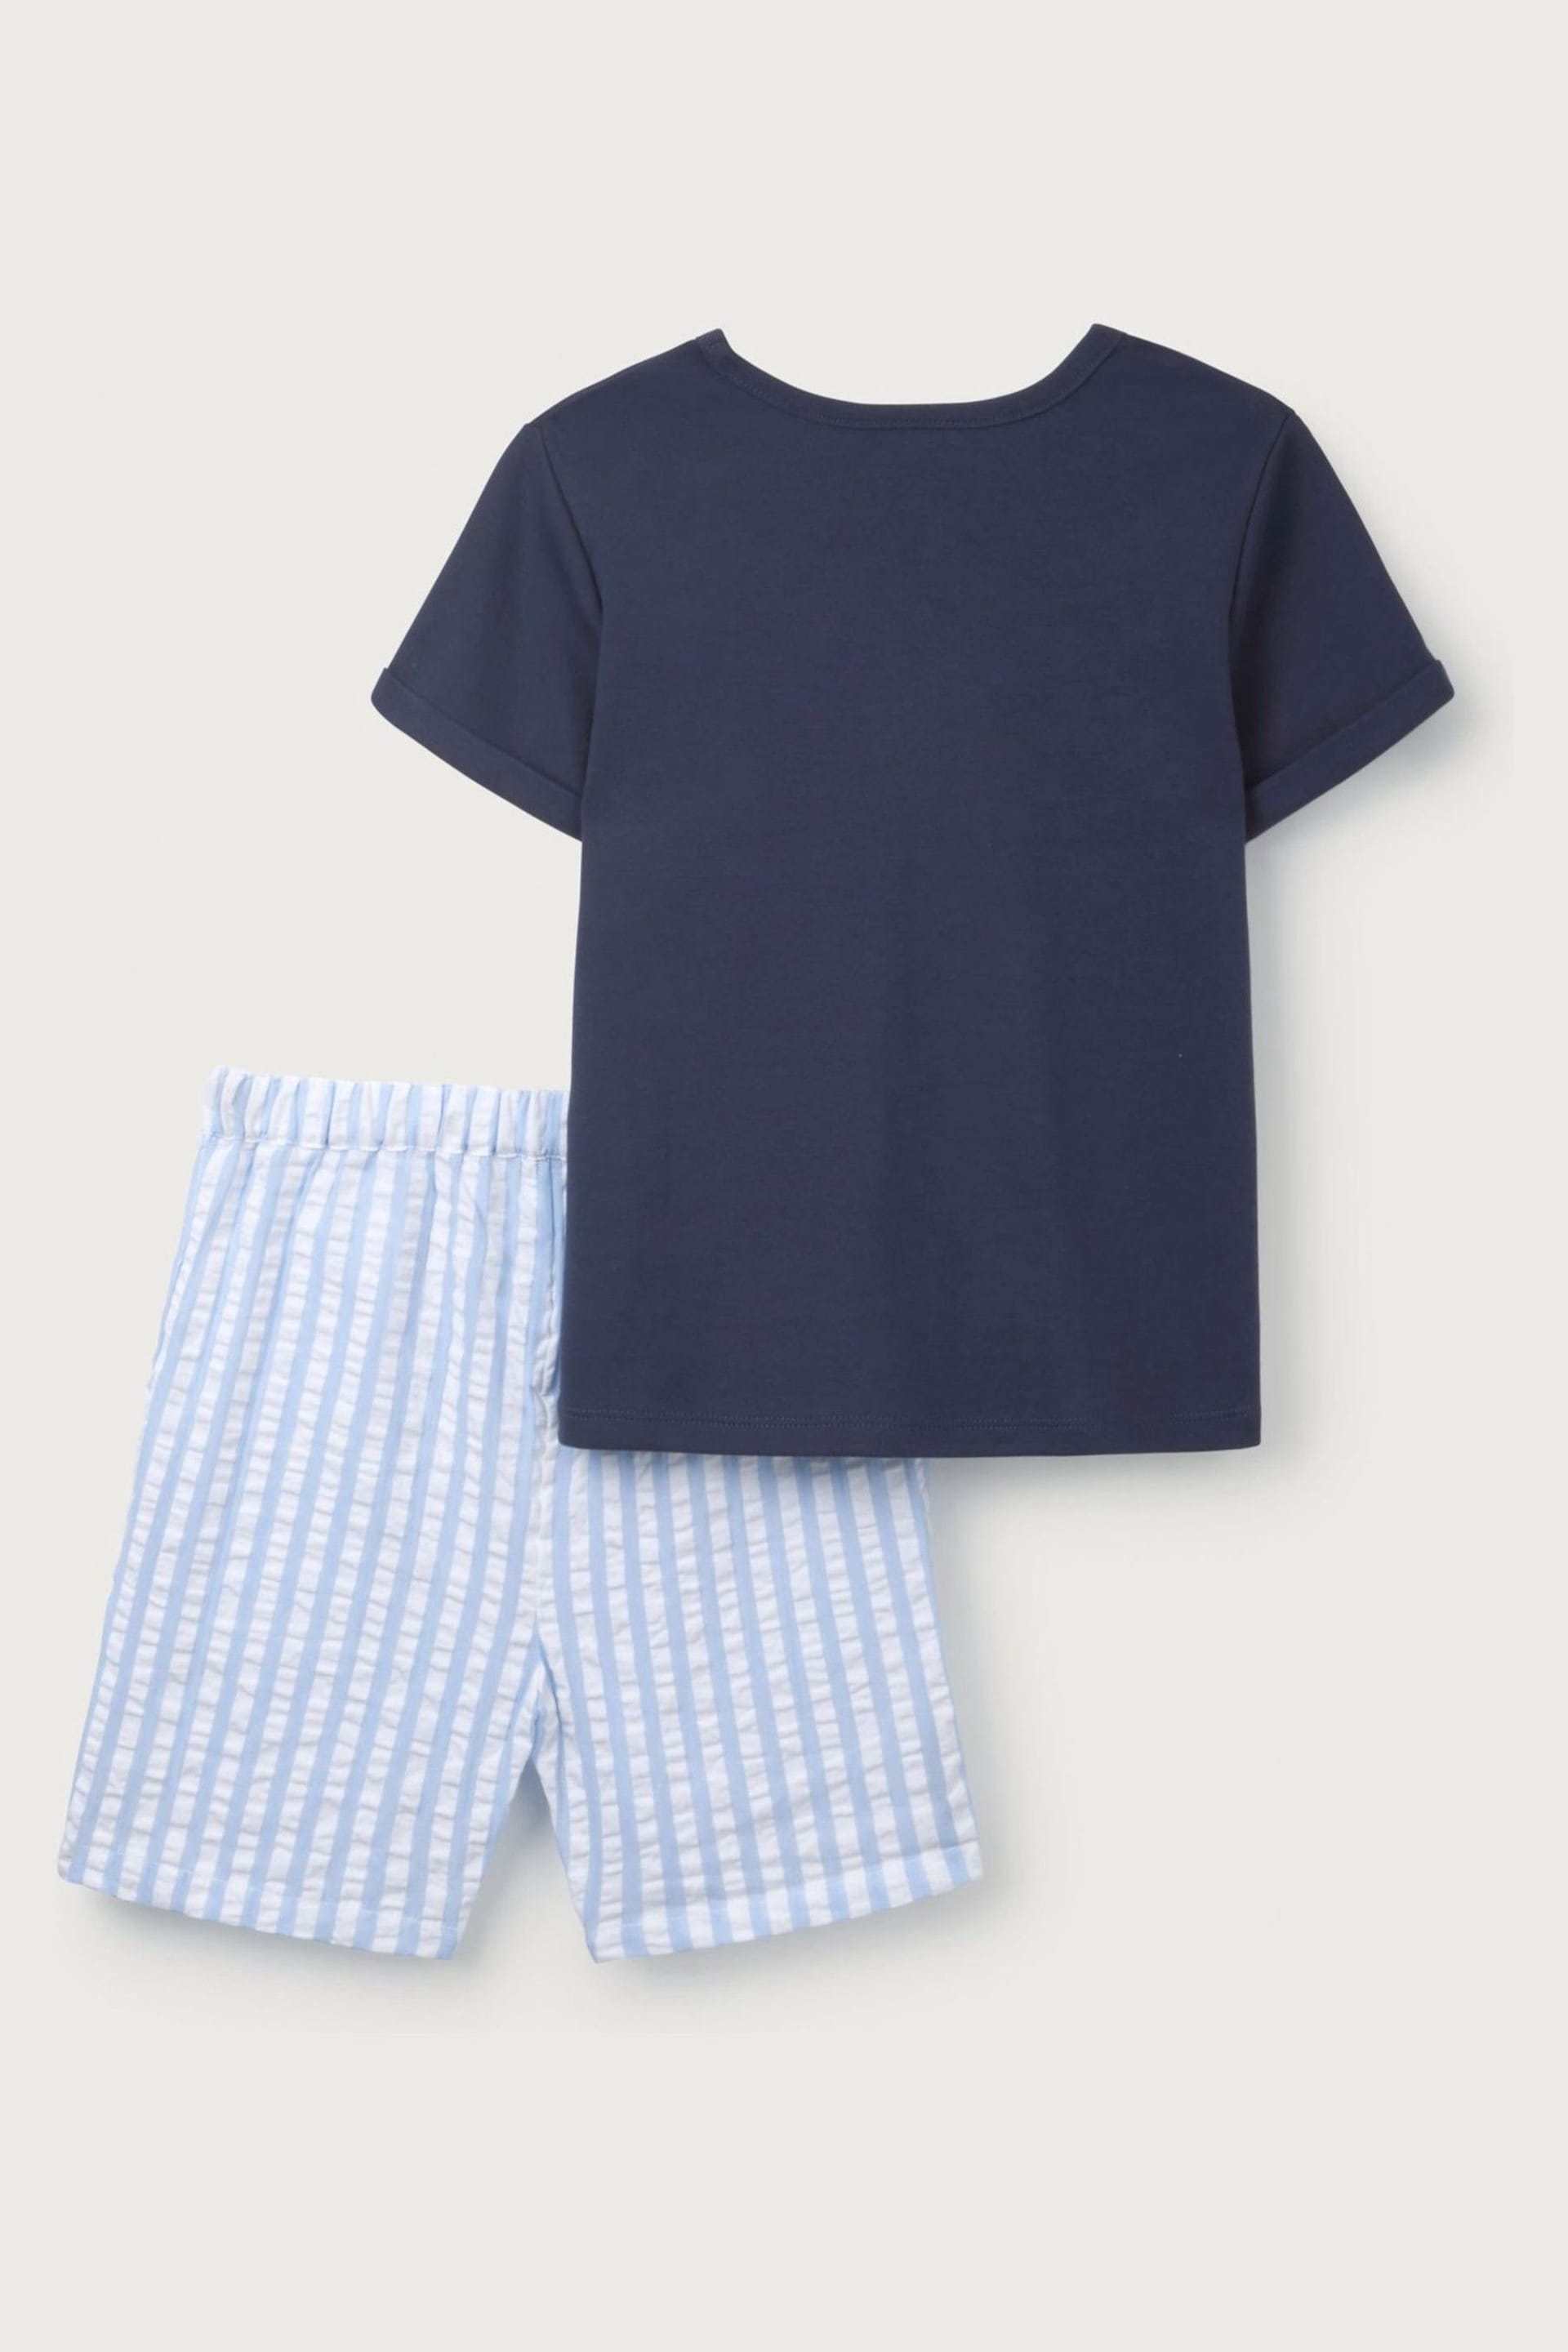 The White Company White Cotton Ribbed Anchor T-Shirt & Seersucker Stripe Short Set - Image 9 of 10